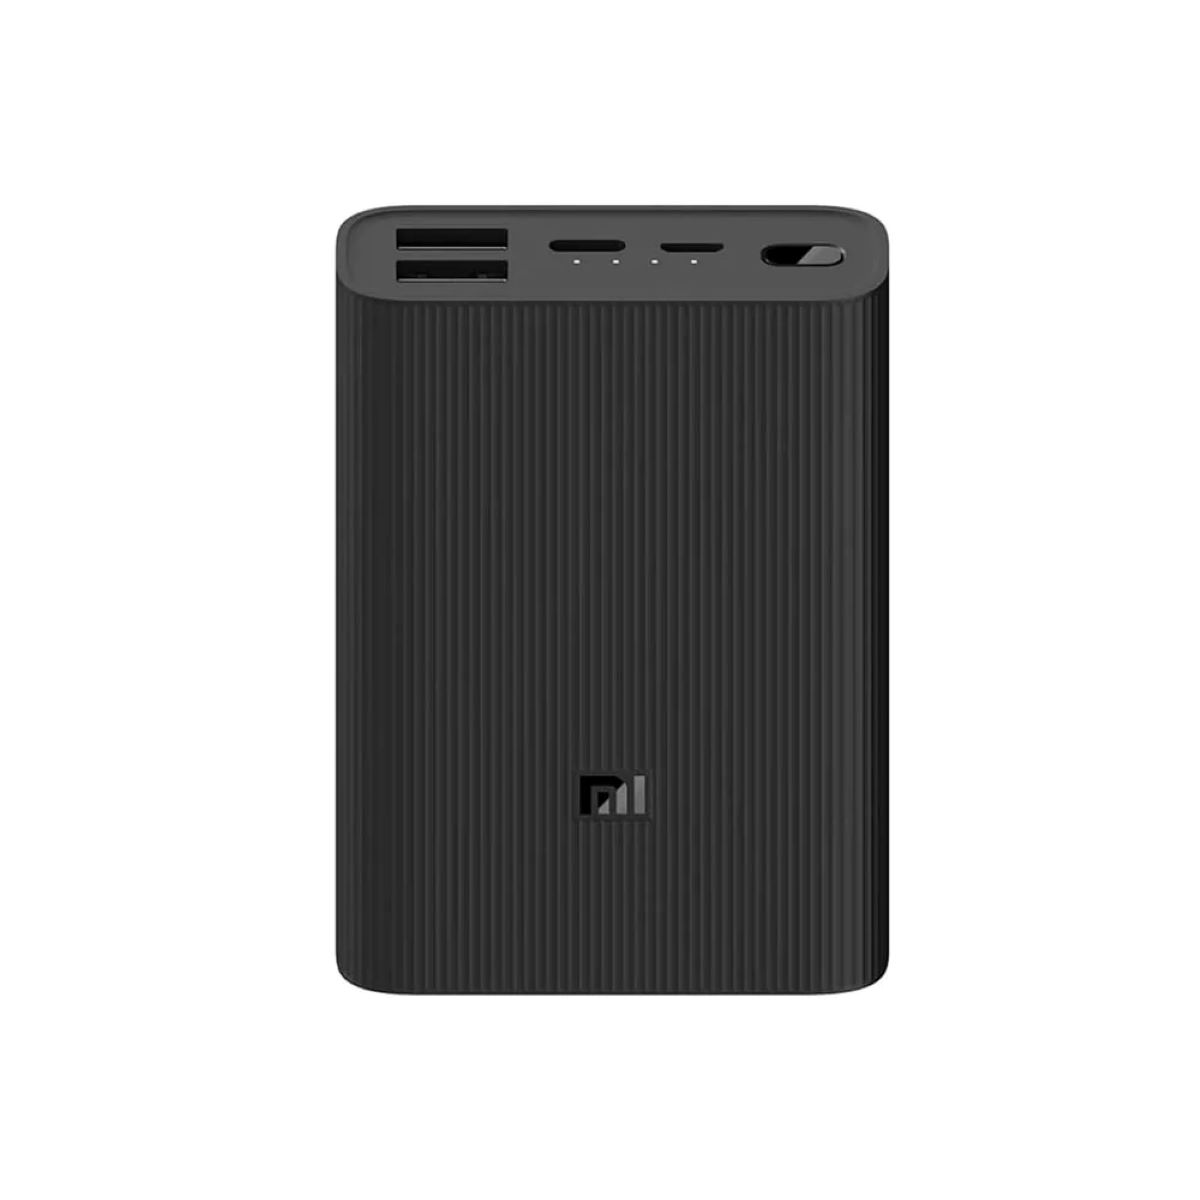  Xiaomi 10000mAh Redmi Power Bank Portable Charger, Dual Input  and Output Ports, 37Wh High Capacity, External Battery Pack Compatible with  iPhone, Samsung, Android Devices and Other Smart Devices : Cell Phones